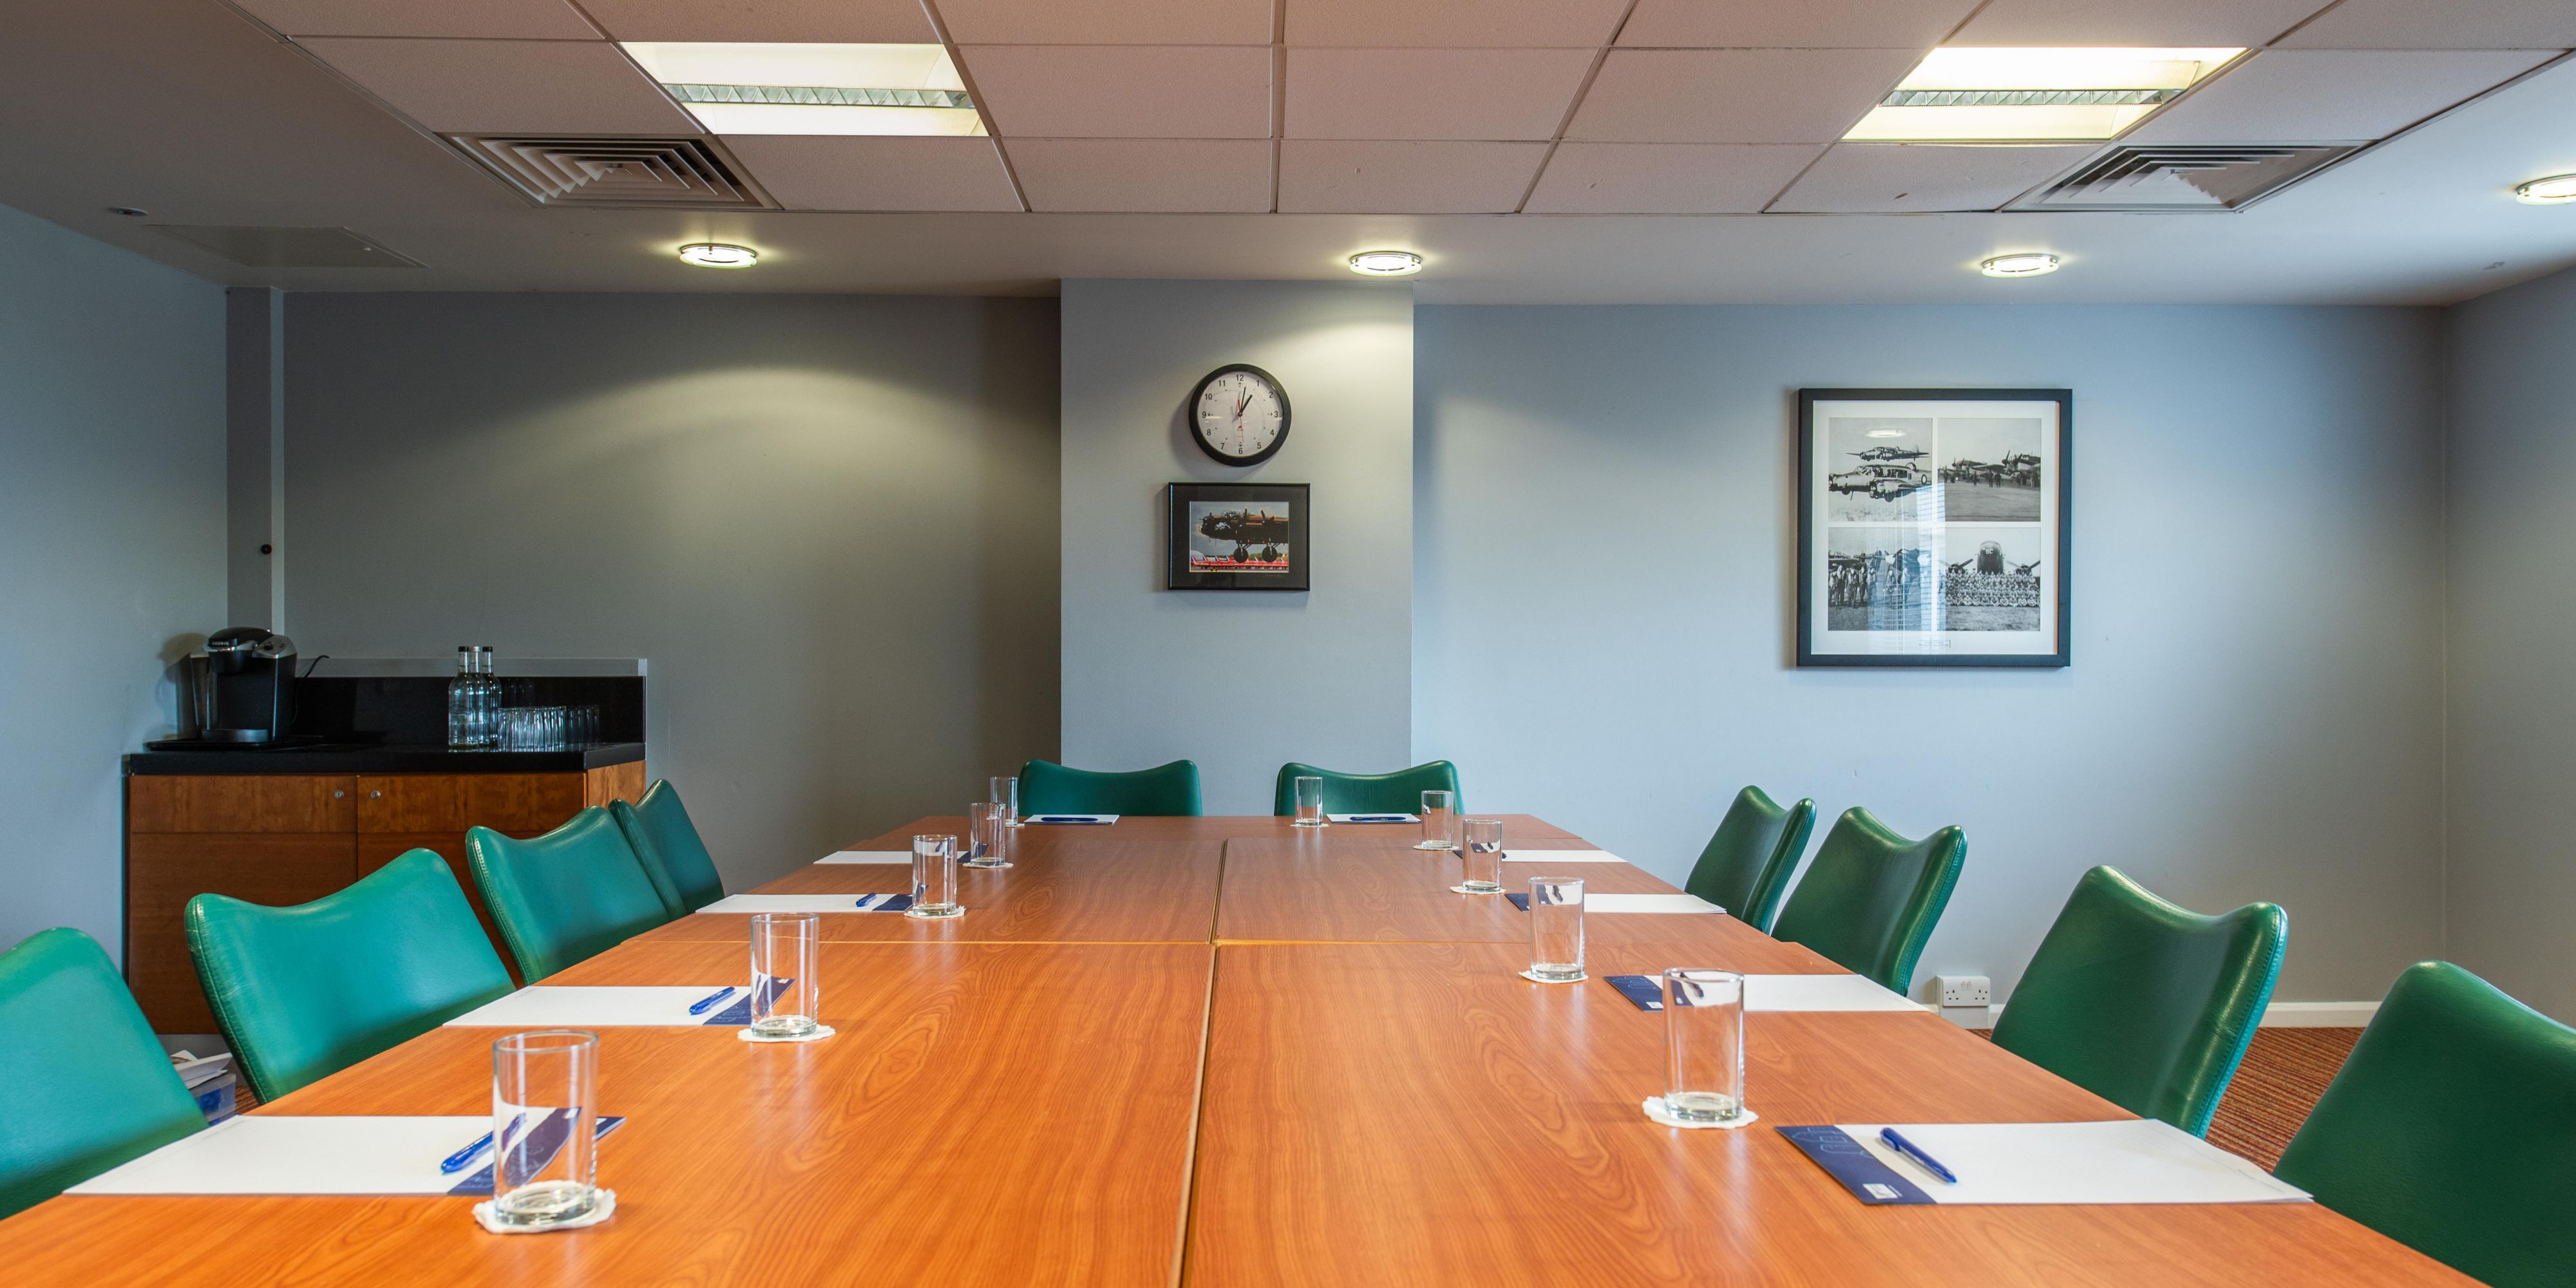 Want a bit more space than you've got in the office? Our meeting rooms offer a modern location to get together with colleagues in a comfortable, professional, and safe environment. We can provide lunches and accommodations for those travelling from further afield.